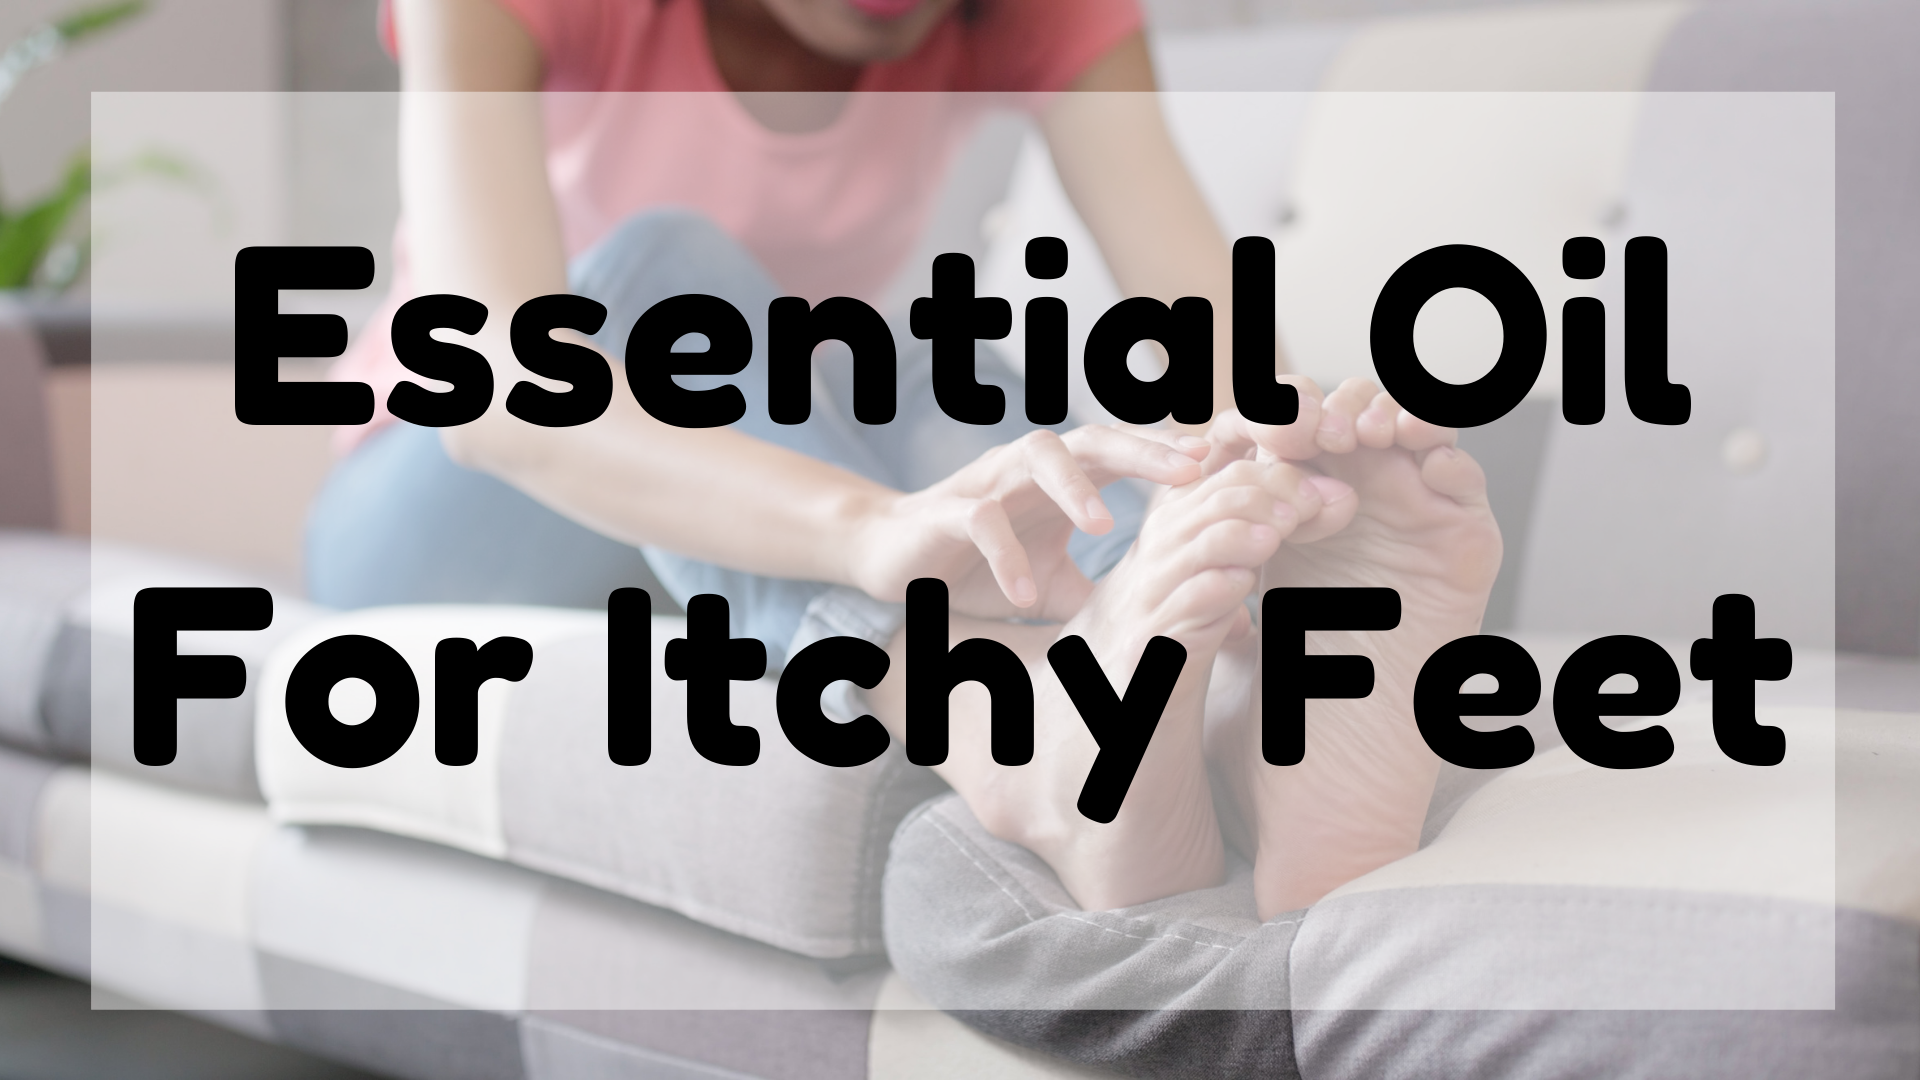 Essential Oil For Itchy Feet